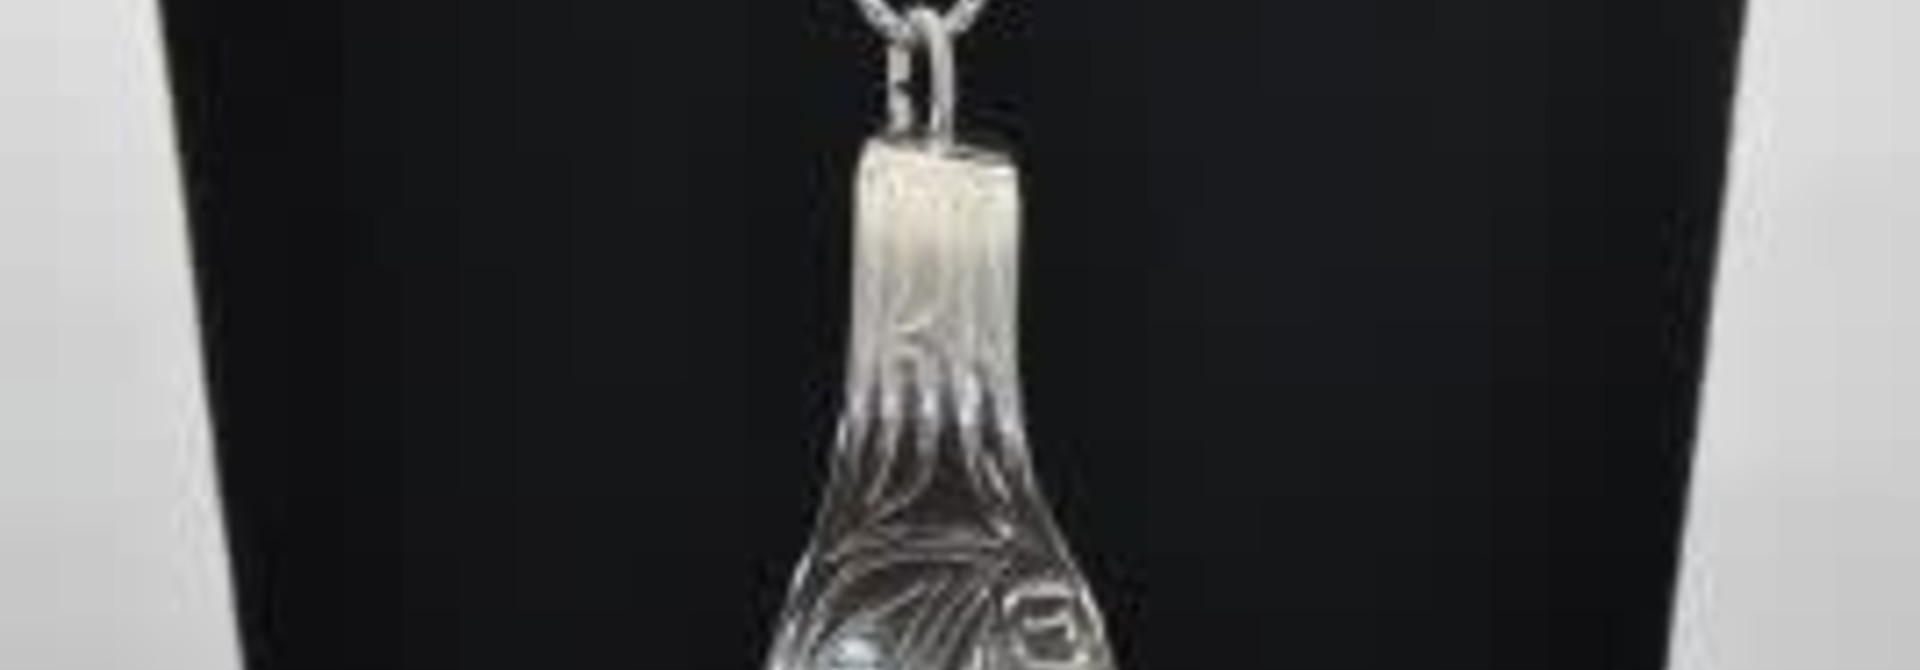 Hand Crafted Silver Pendant- Eagle by Vincent Henson